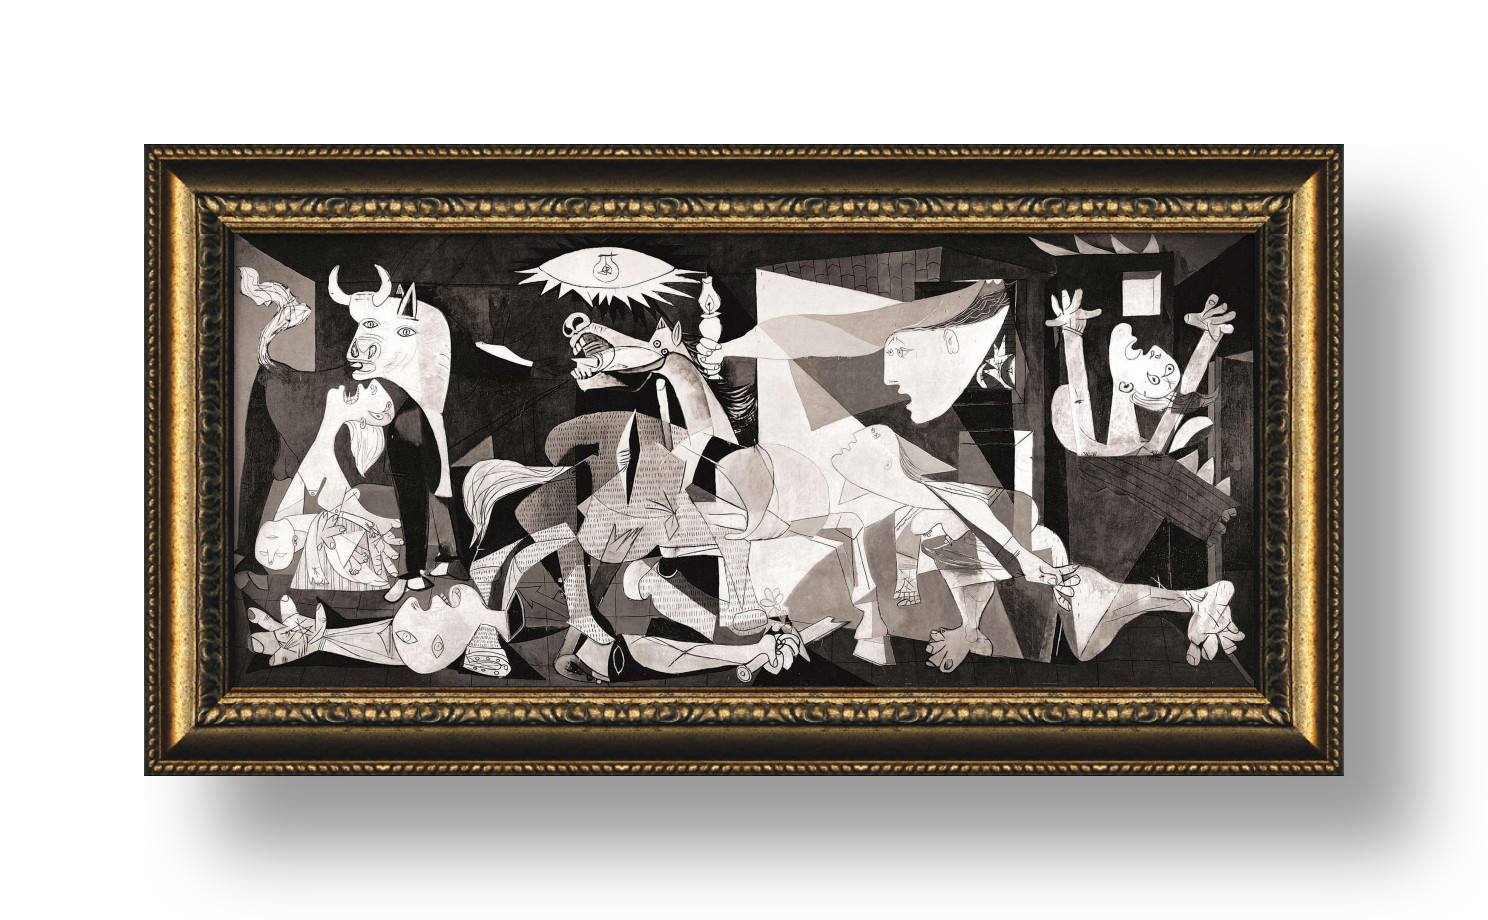 Guernica by Pablo Picasso | Framed canvas | Wall art HD print artwork ...